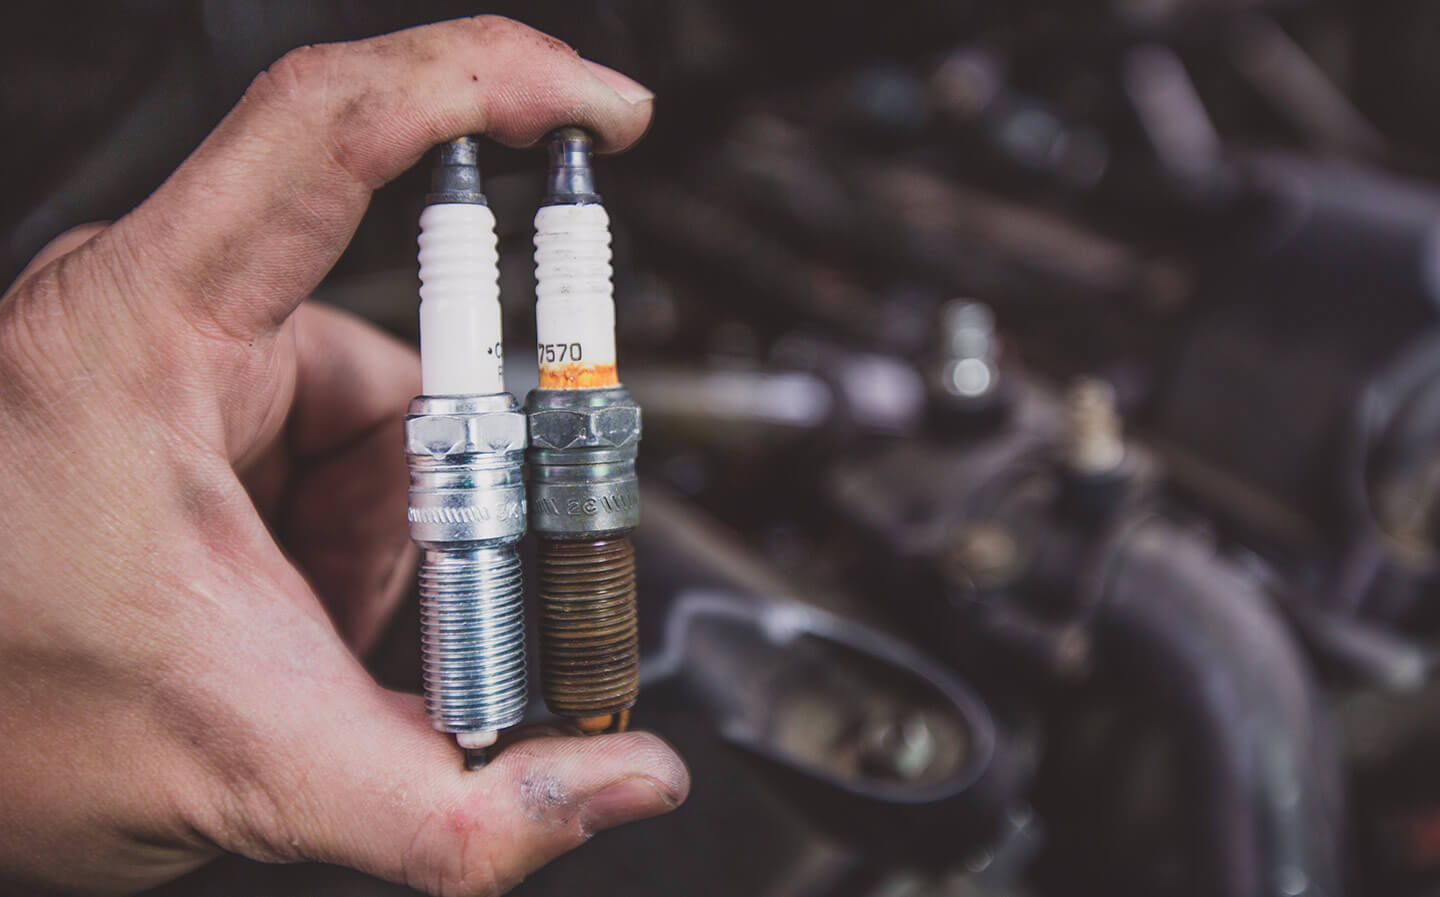 remove the spark plugs and fuse